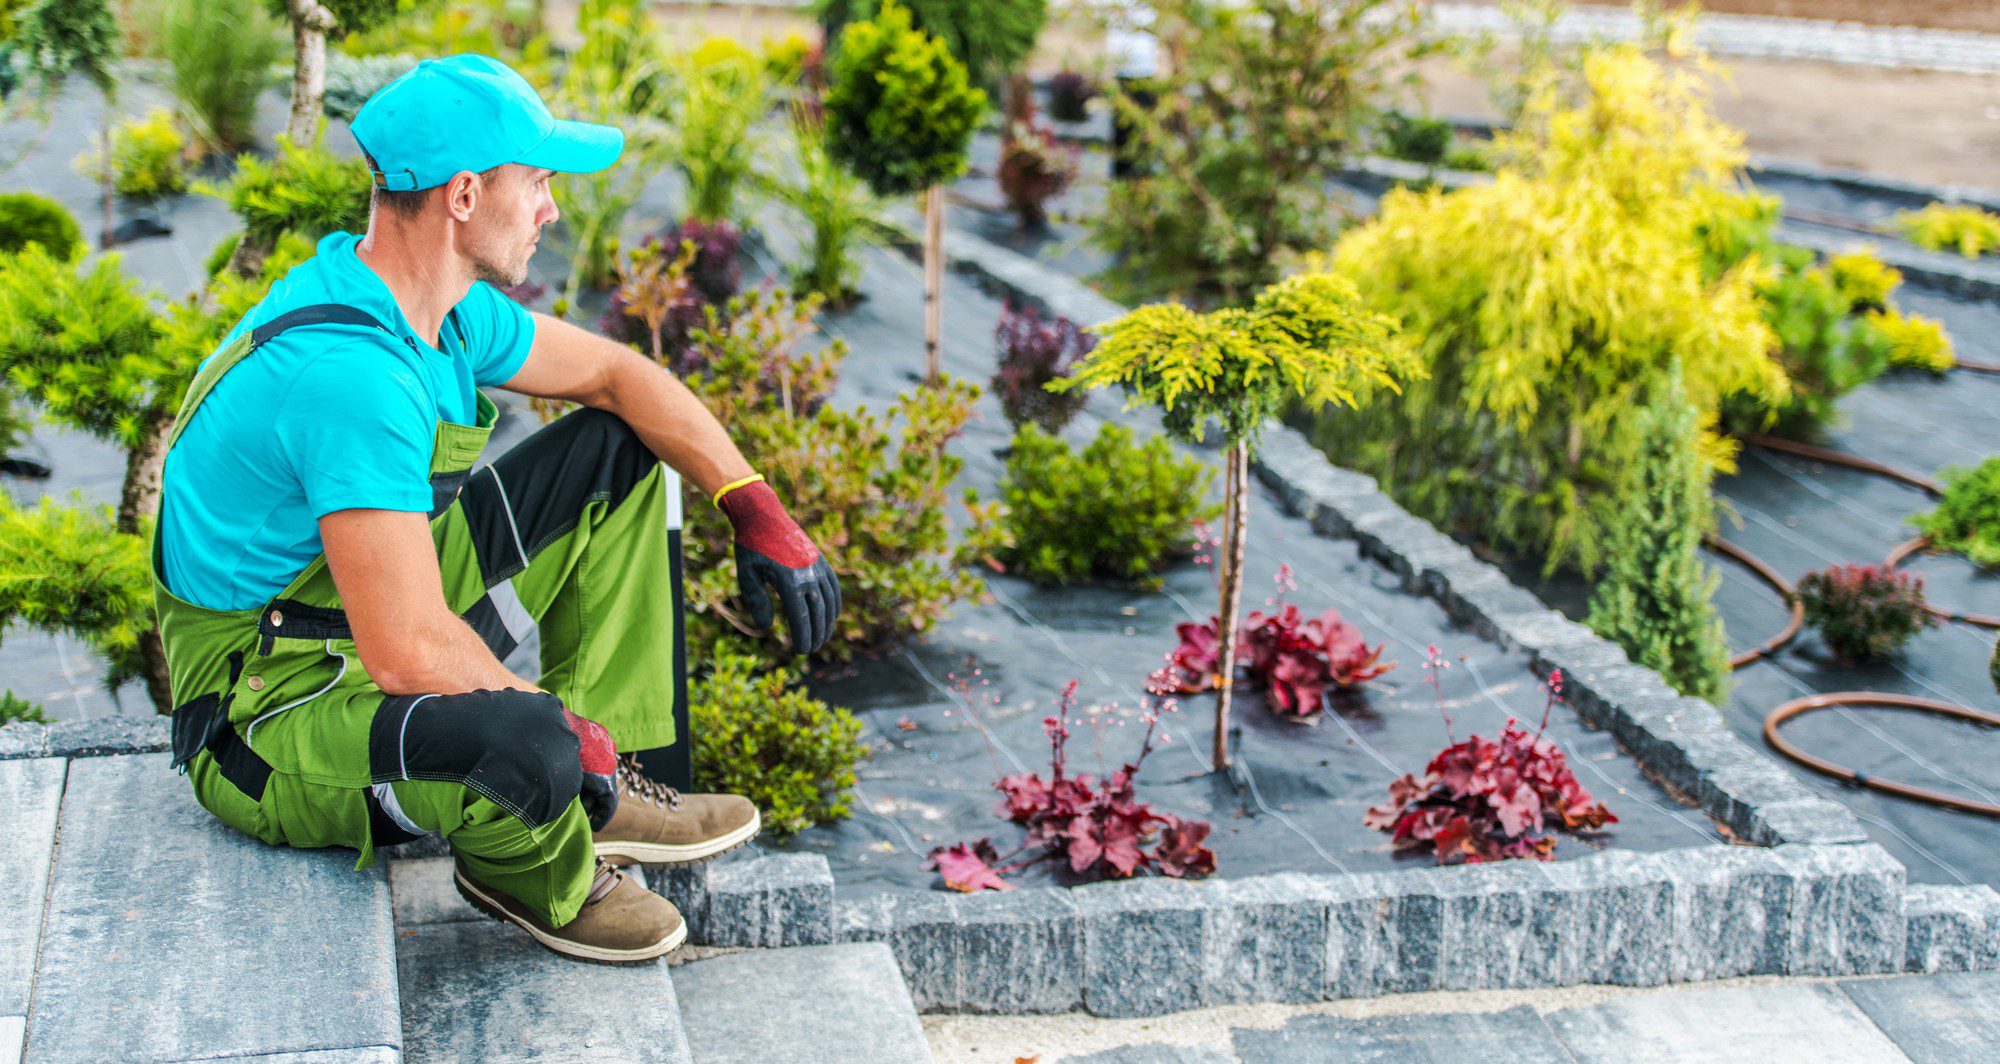 The image showcases a person, likely a gardener or landscaper, seated on the edge of a paved area with their gaze directed towards some greenery. The individual is wearing work attire that consists of a bright teal shirt, green pants with reflective safety strips, and a matching teal cap. They also sport gloves, which implies they might have been working with plants or soil.The environment appears to be a well-maintained garden or nursery with rows of various plants, some of which have colorful foliage. The area has gravel or mulch-covered beds, separated by stone edging, and a drip irrigation system can be seen laid out along the plants, indicating an efficient watering solution. The overall look of the image suggests the person might be taking a break from garden work or contemplating the next task in landscaping or plant care.